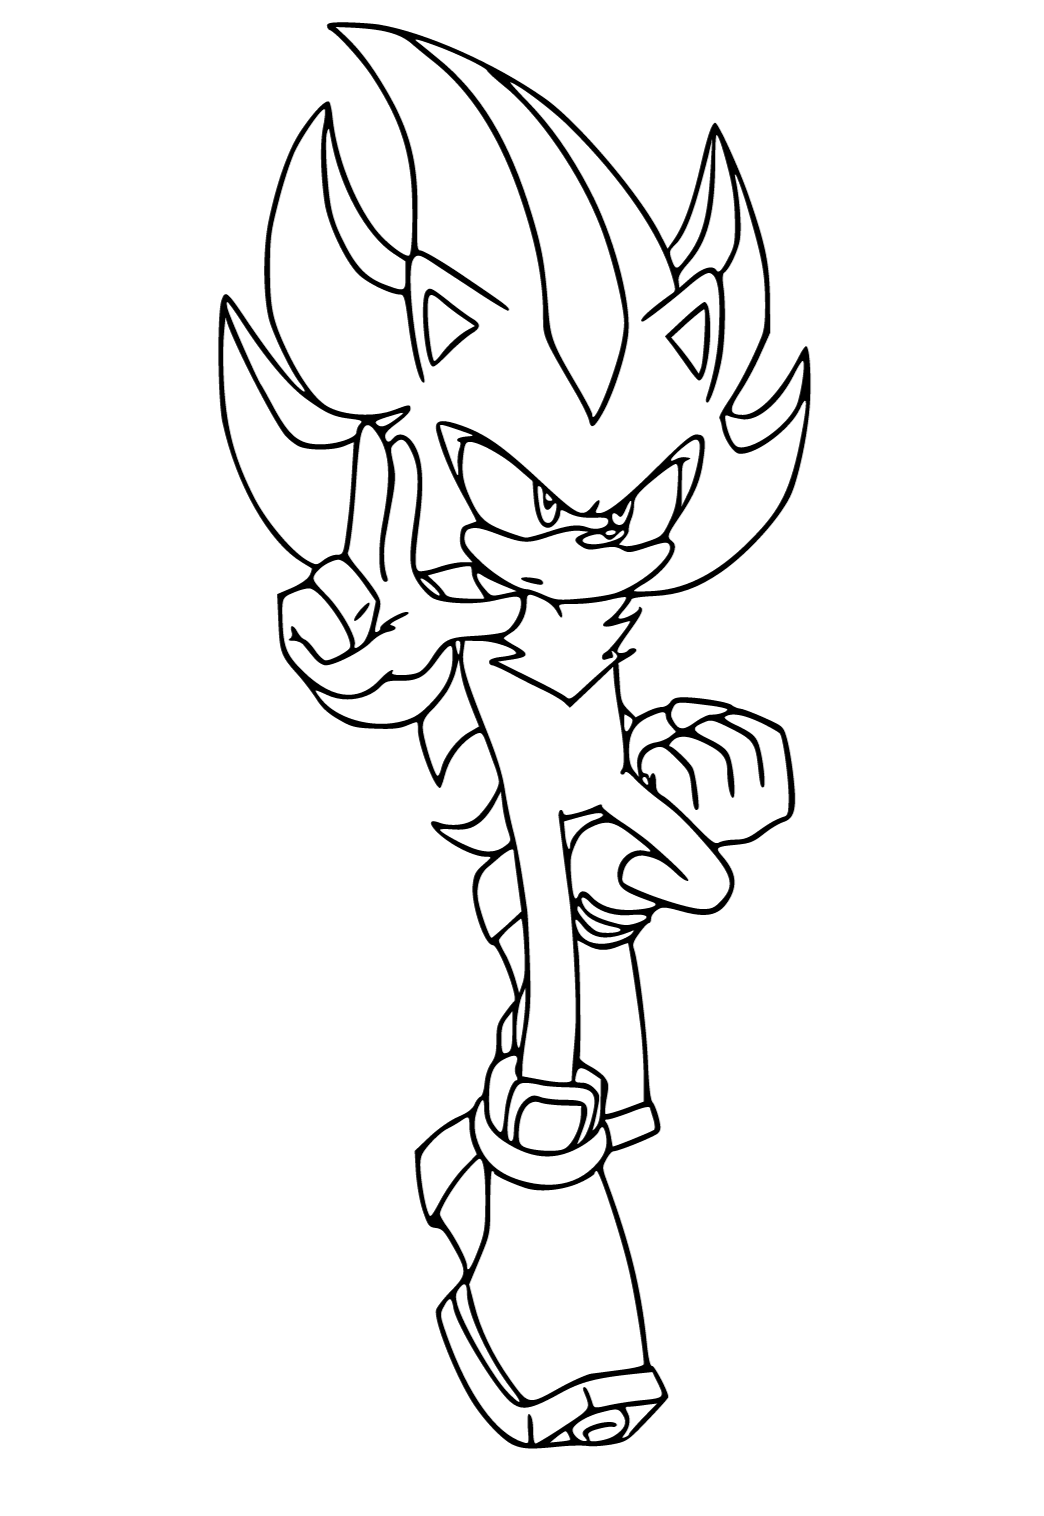 Free printable shadow the hedgehog warning coloring page for adults and kids